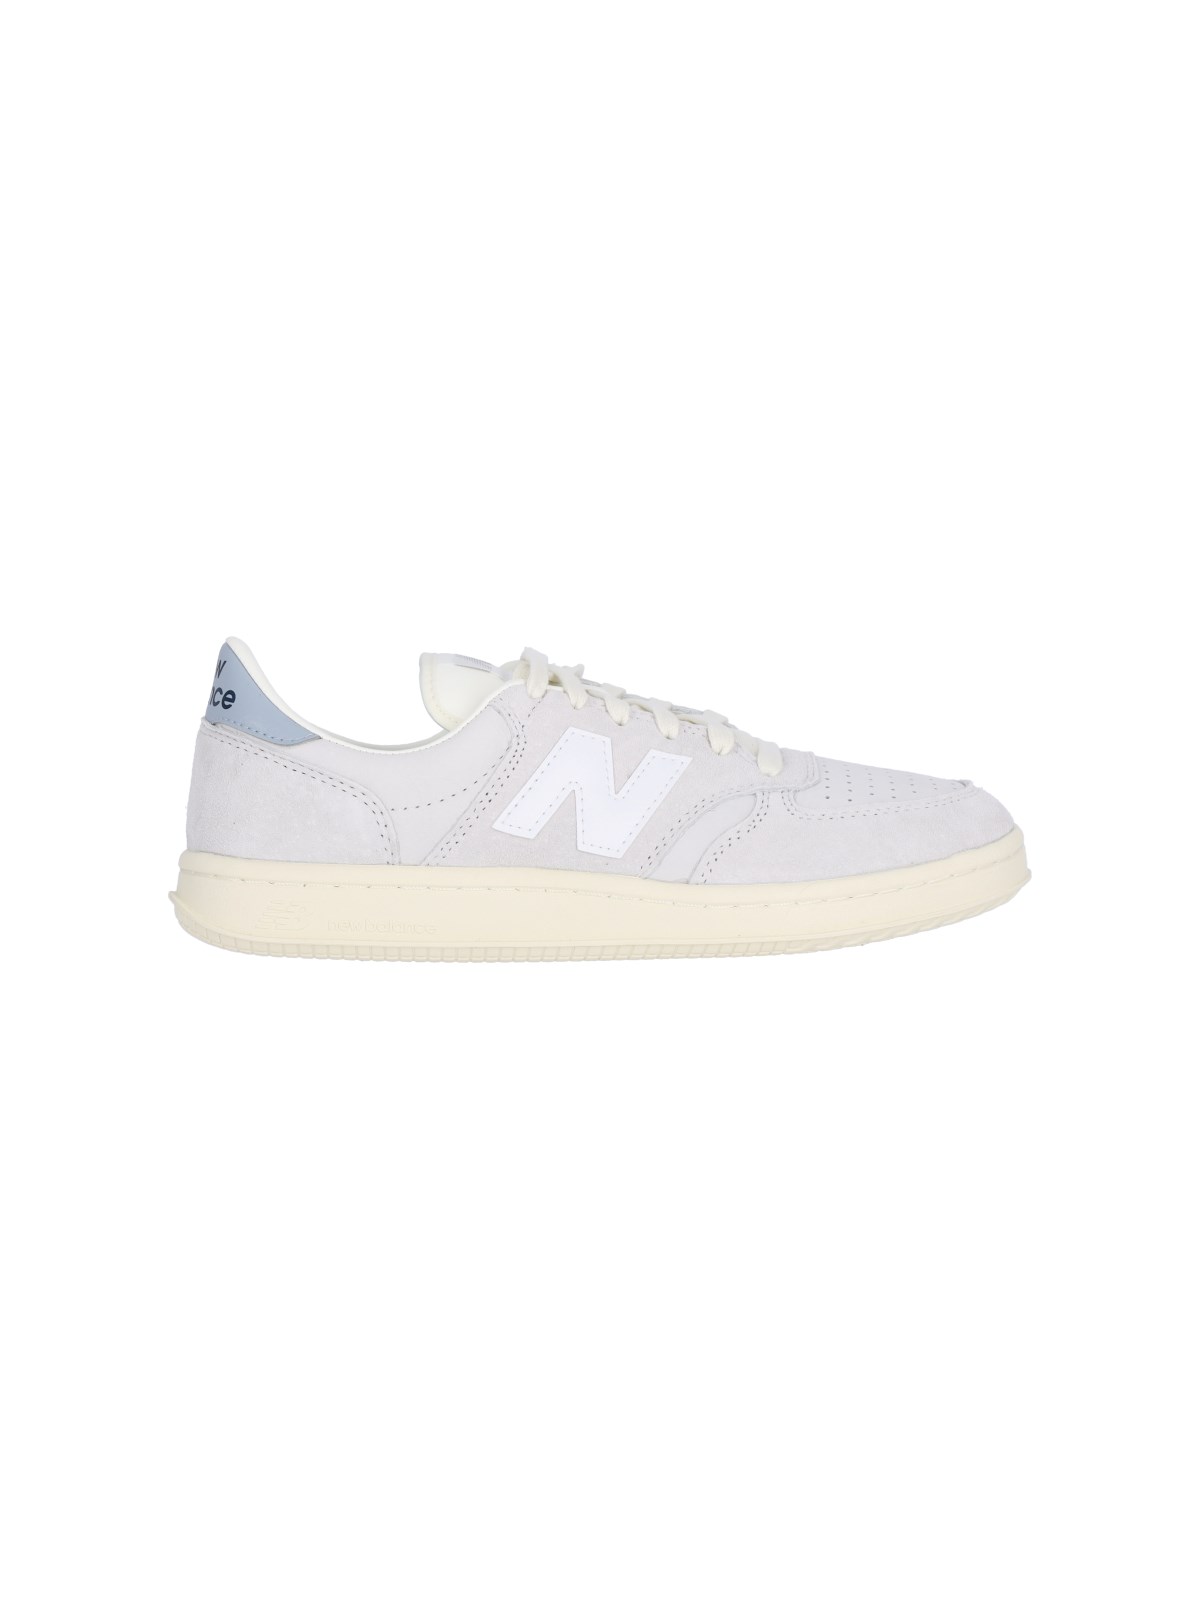 Shop New Balance "t500" Sneakers In White